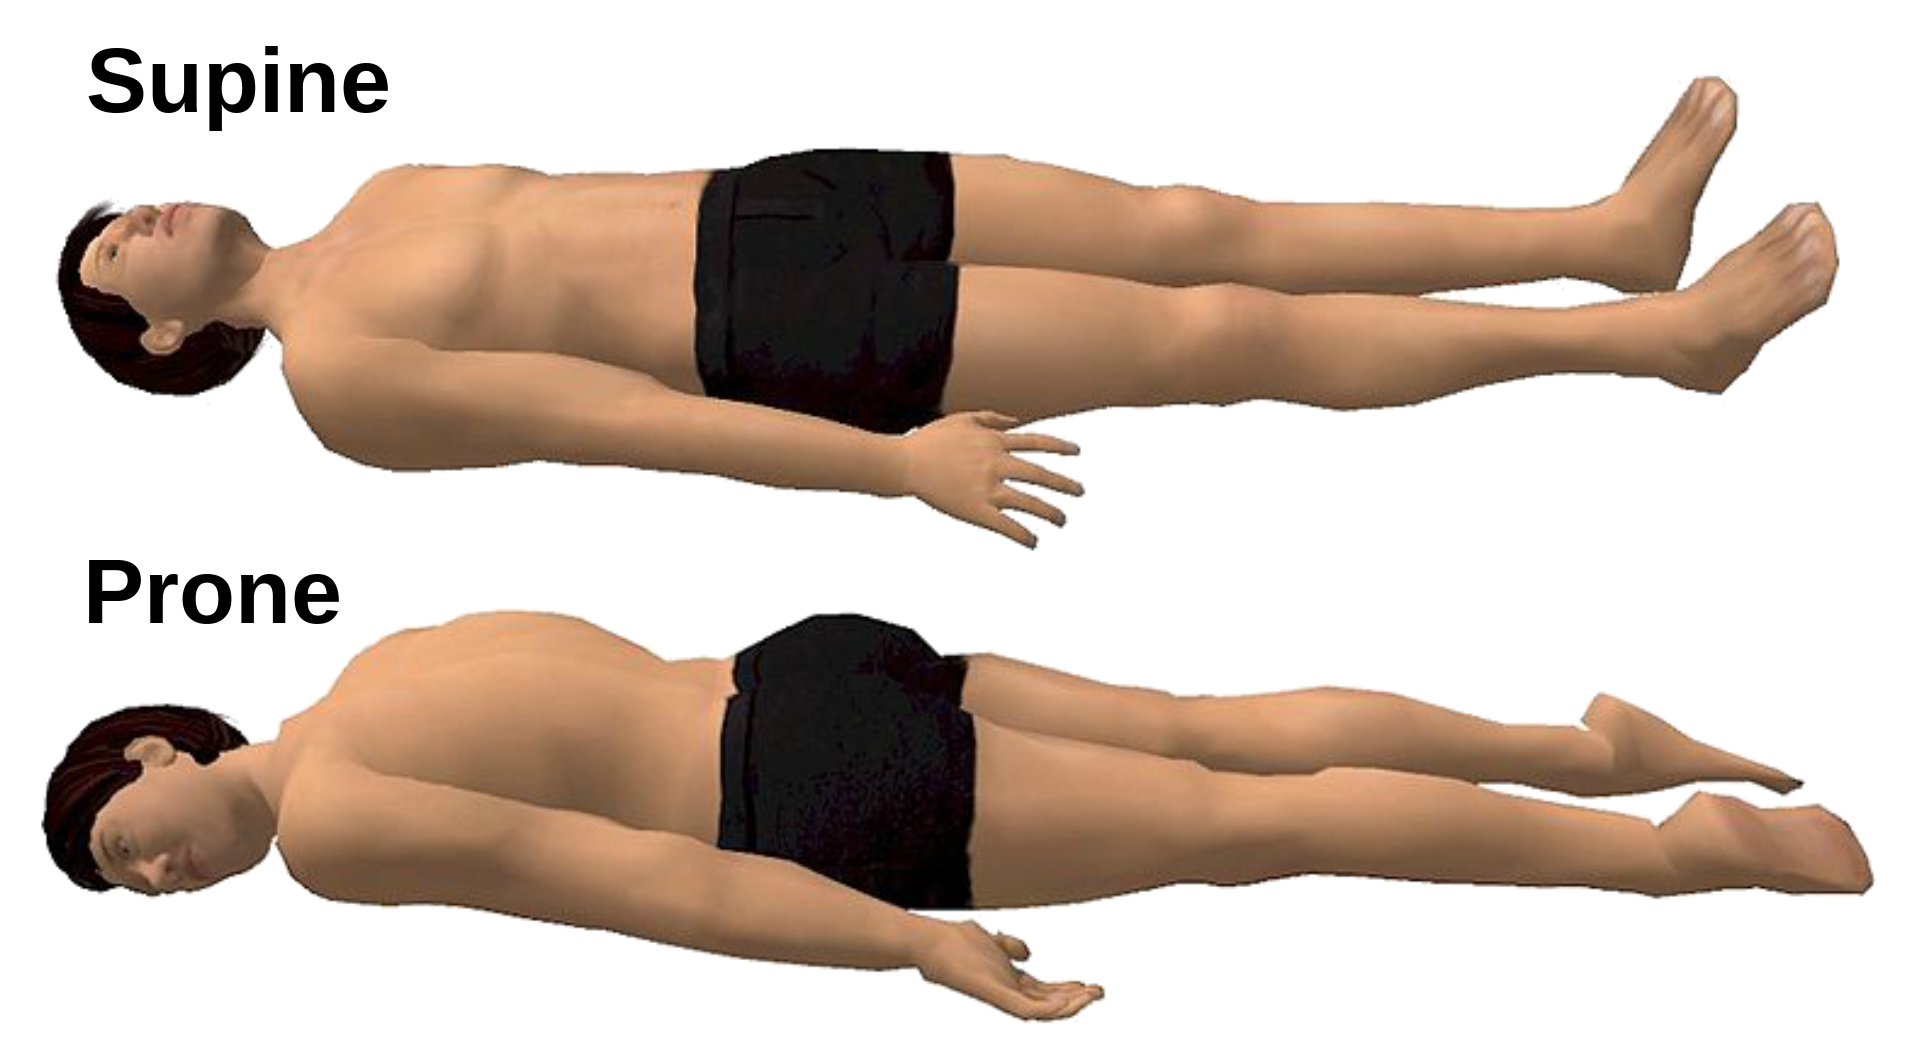 1920px-Supine_and_prone_diagrams-en.svg.png